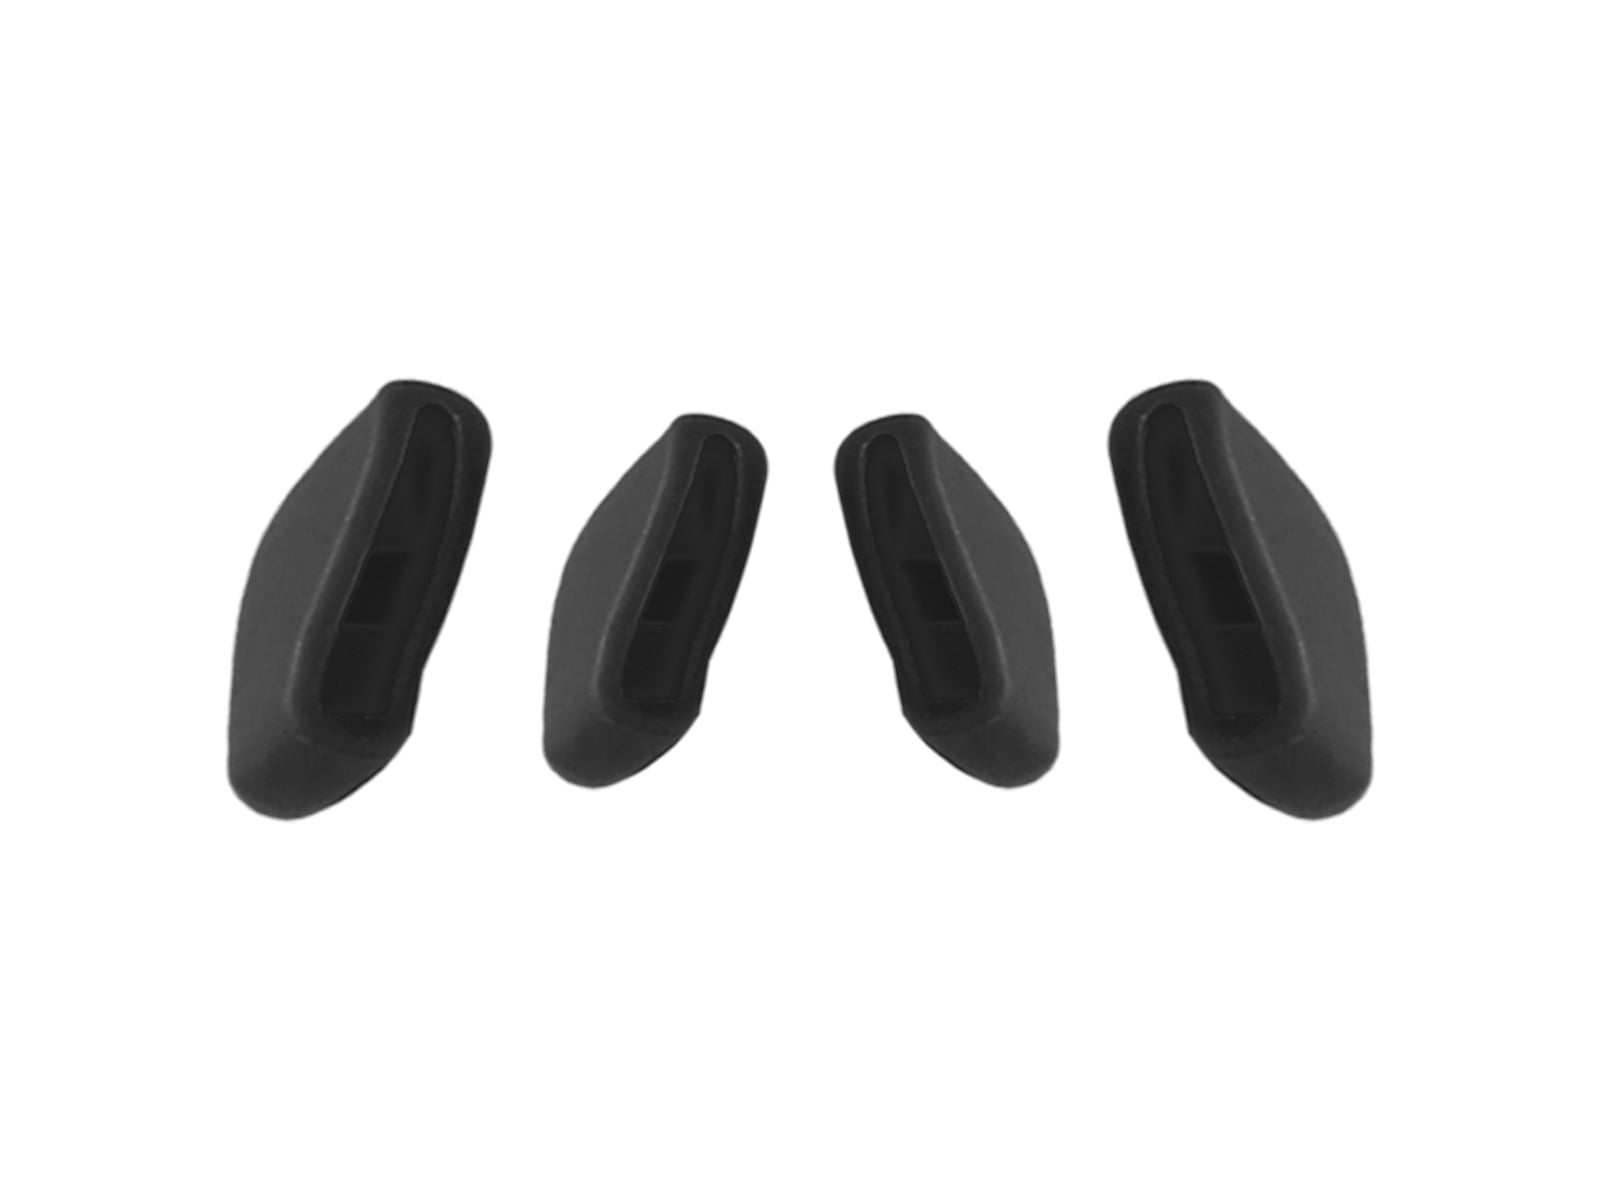 Vonxyz Black Nose Pads Nosepieces Replacement for Oakley Commit SQ OO9086  Sunglasses 